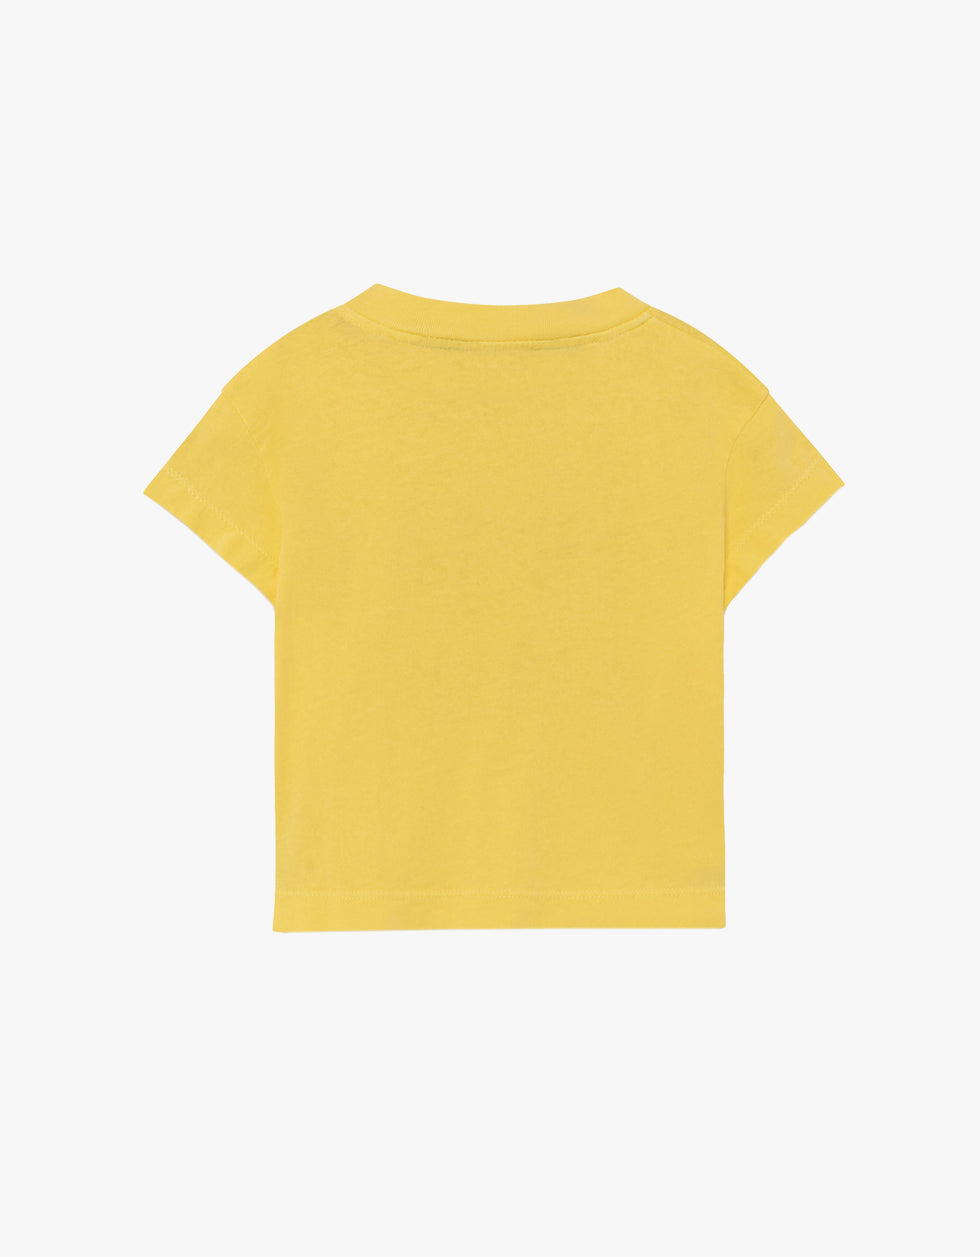 Rooster T-Shirt | Soft Yellow Cyprus